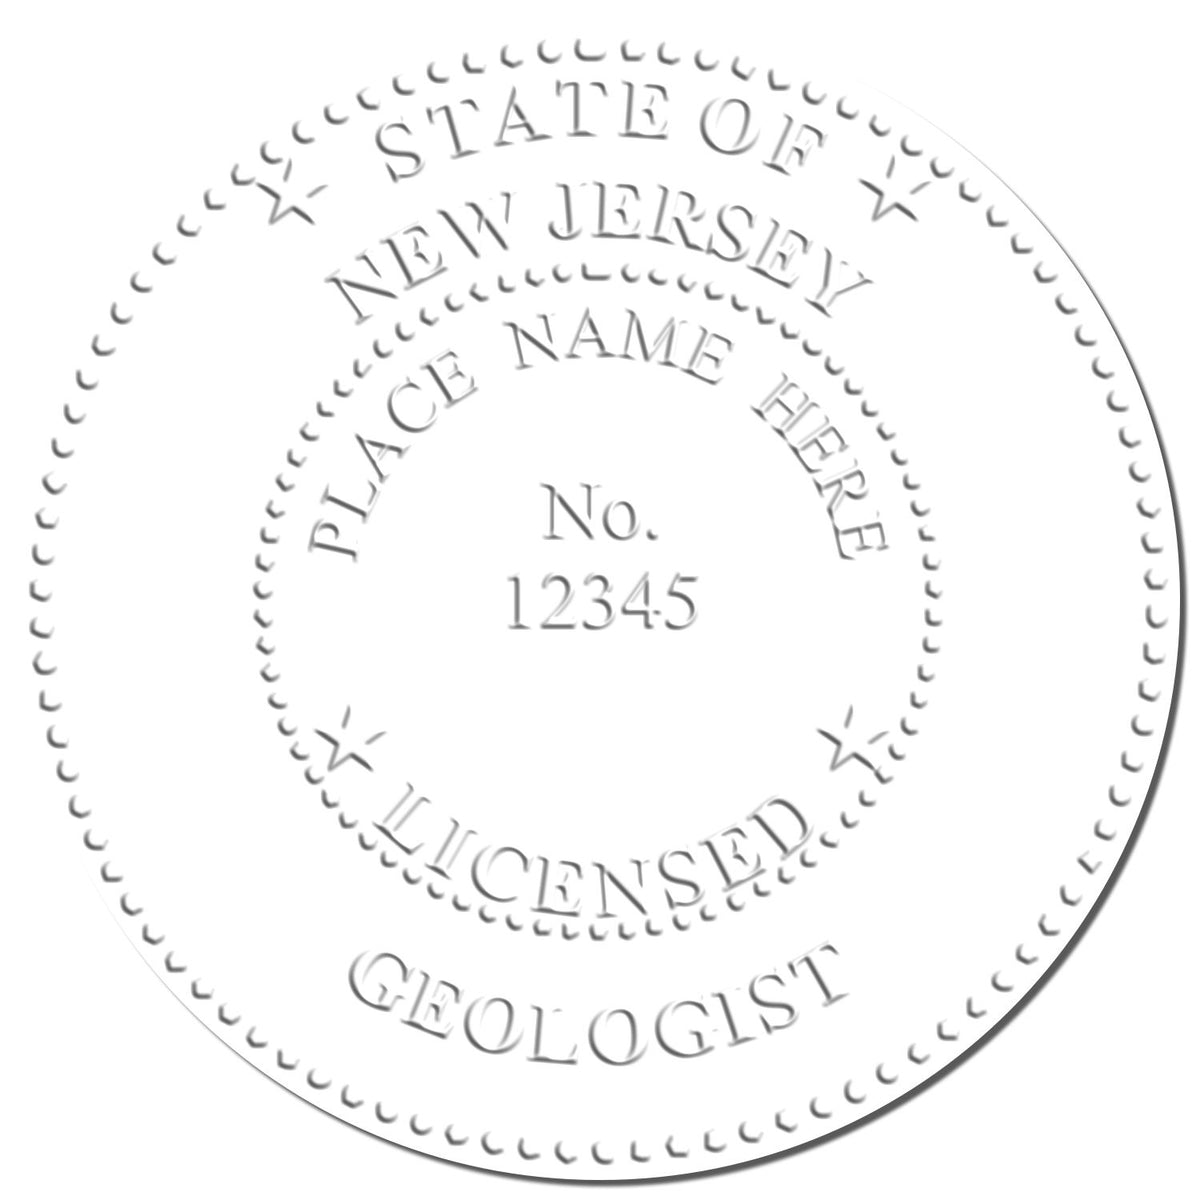 A photograph of the Hybrid New Jersey Geologist Seal stamp impression reveals a vivid, professional image of the on paper.